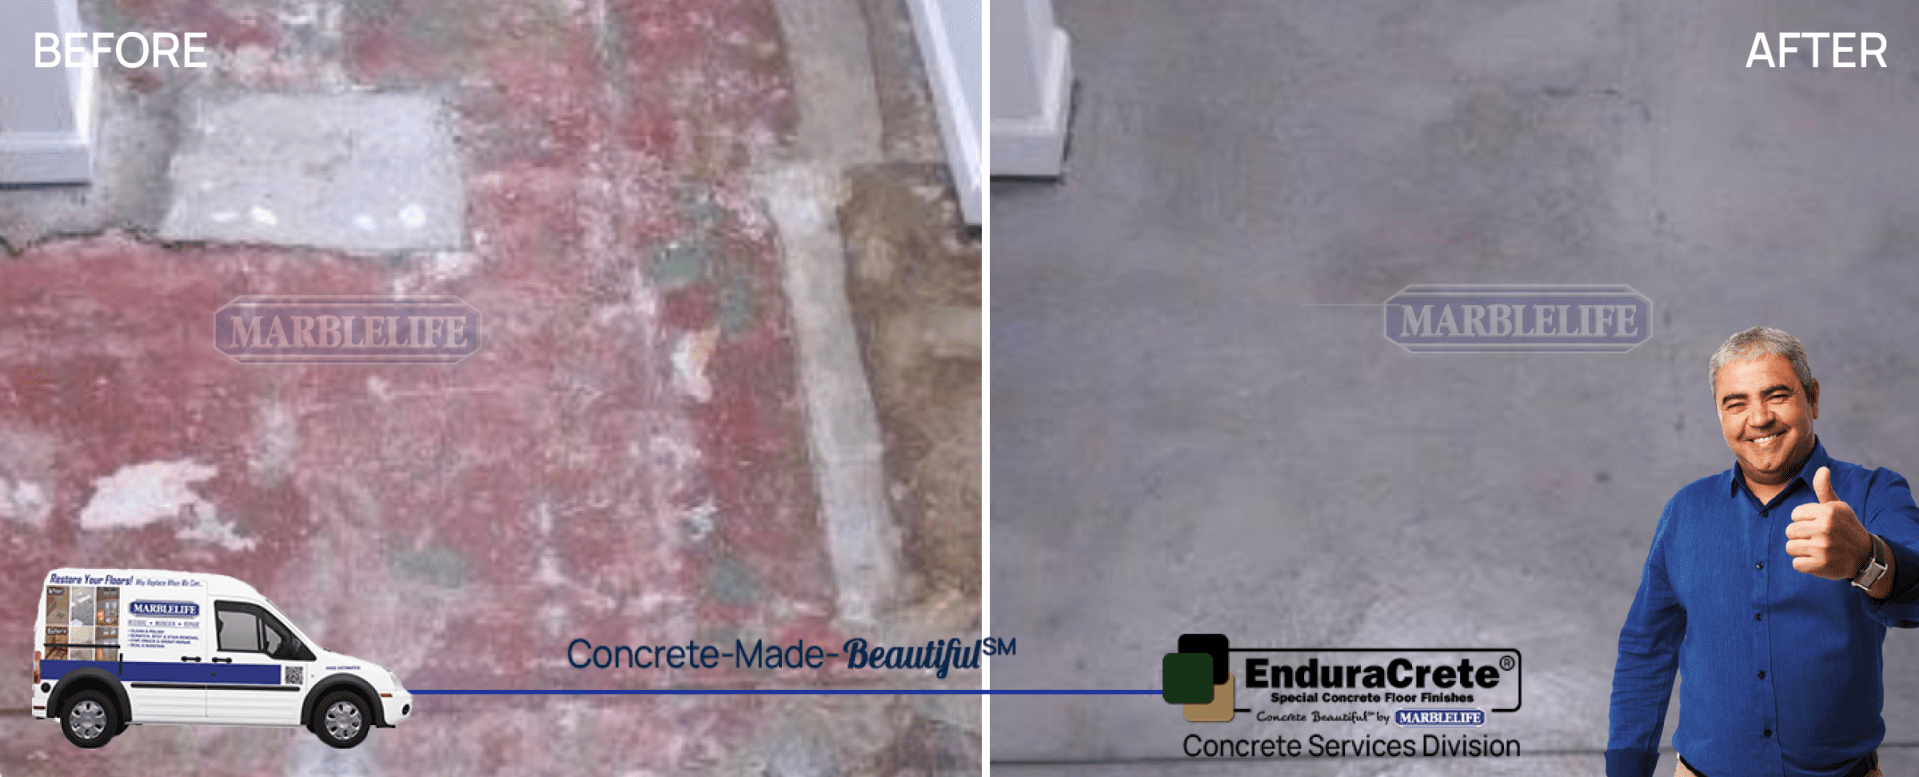 Concrete Surface Flaking (Spalling) Fixed by MARBLELIFE Concrete Service Division Professionals